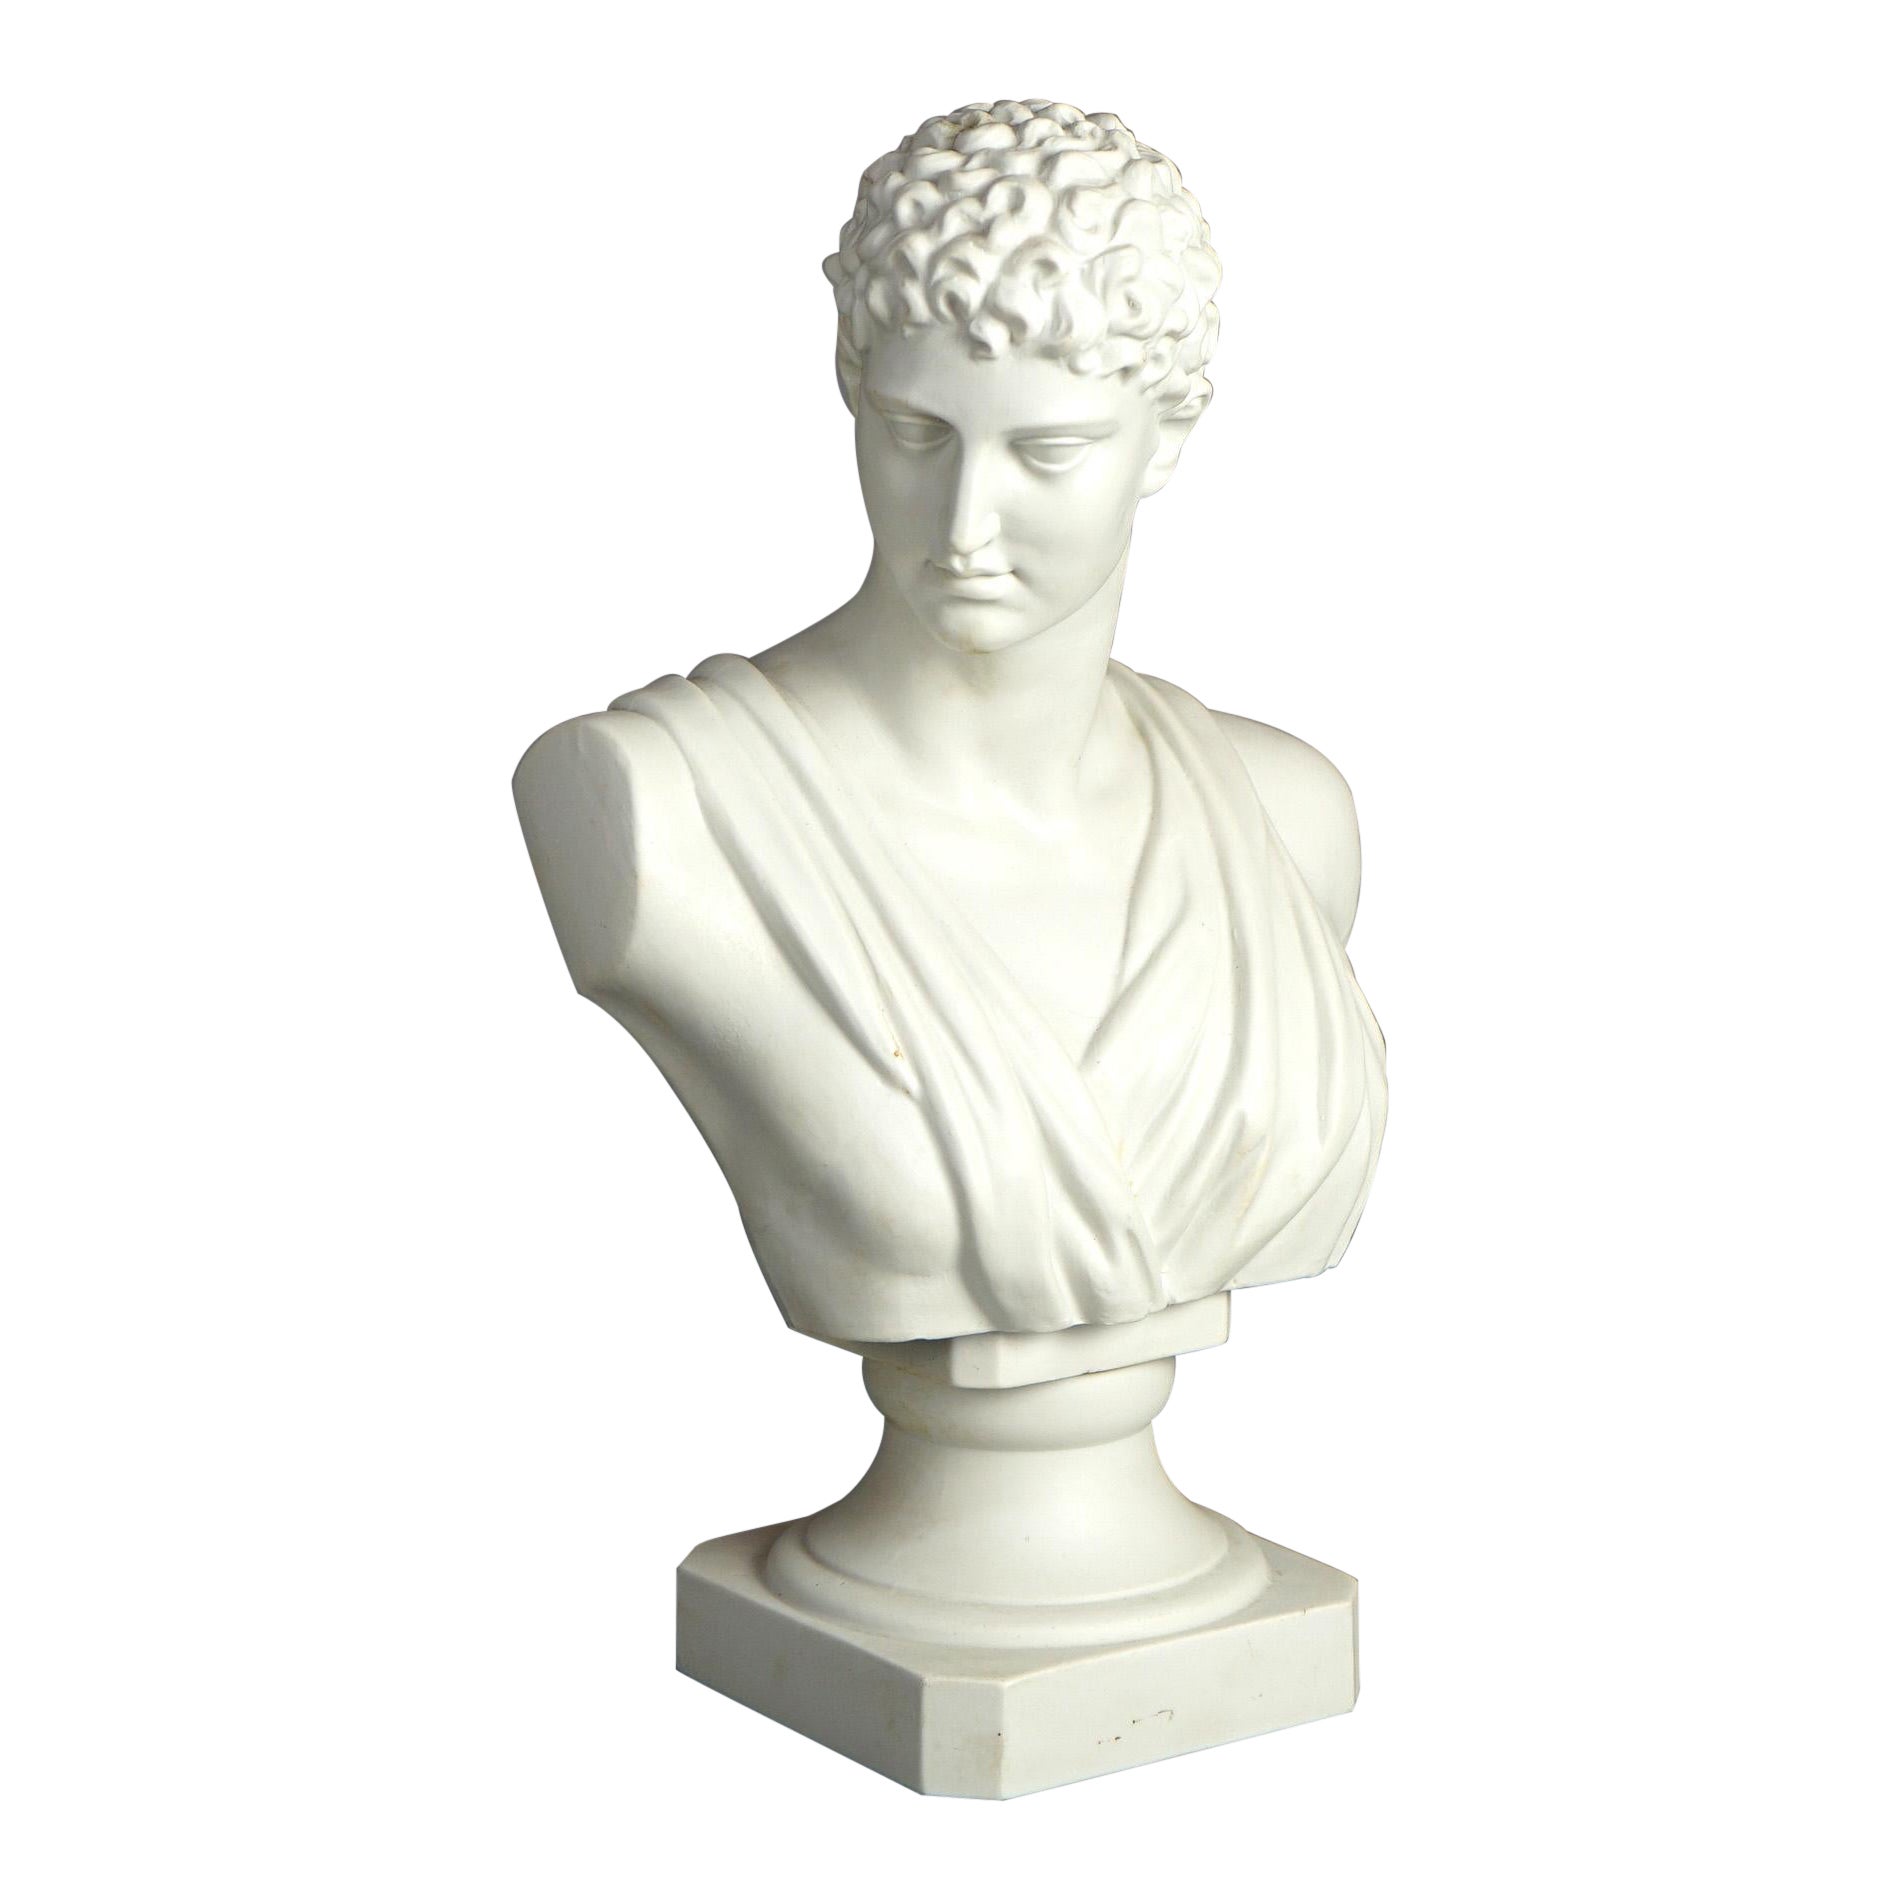 Antique French Neoclassical Parian Porcelain Bust of Michaelangelo's David C1900 For Sale